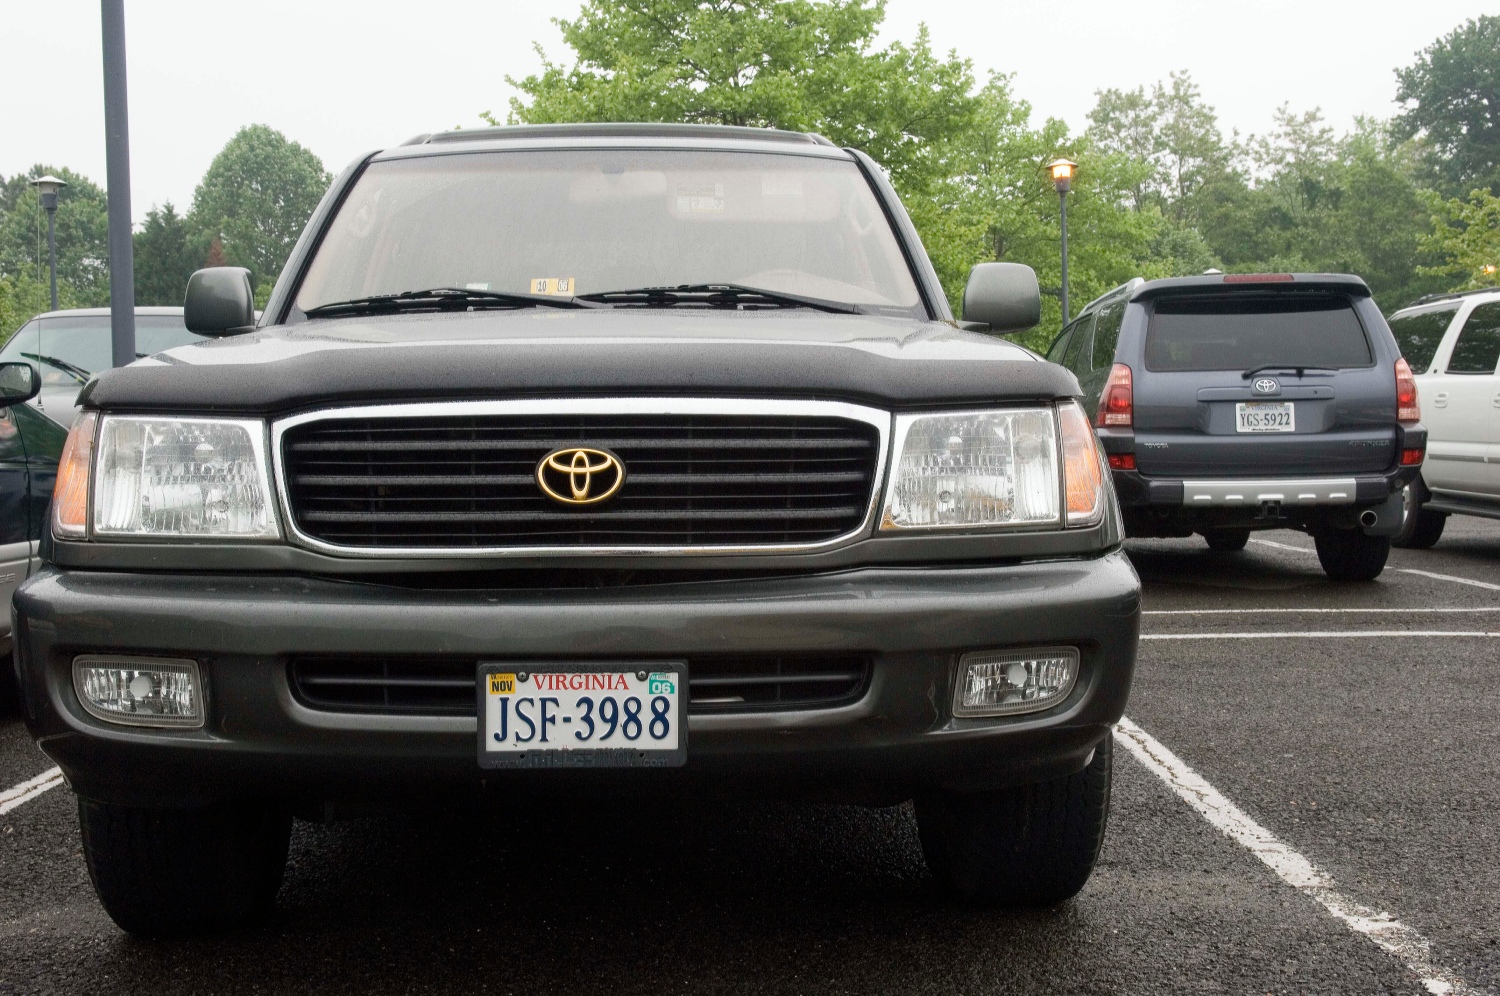 Toyota cars and SUVs like this Land Cruiser last so long because they are meant to last